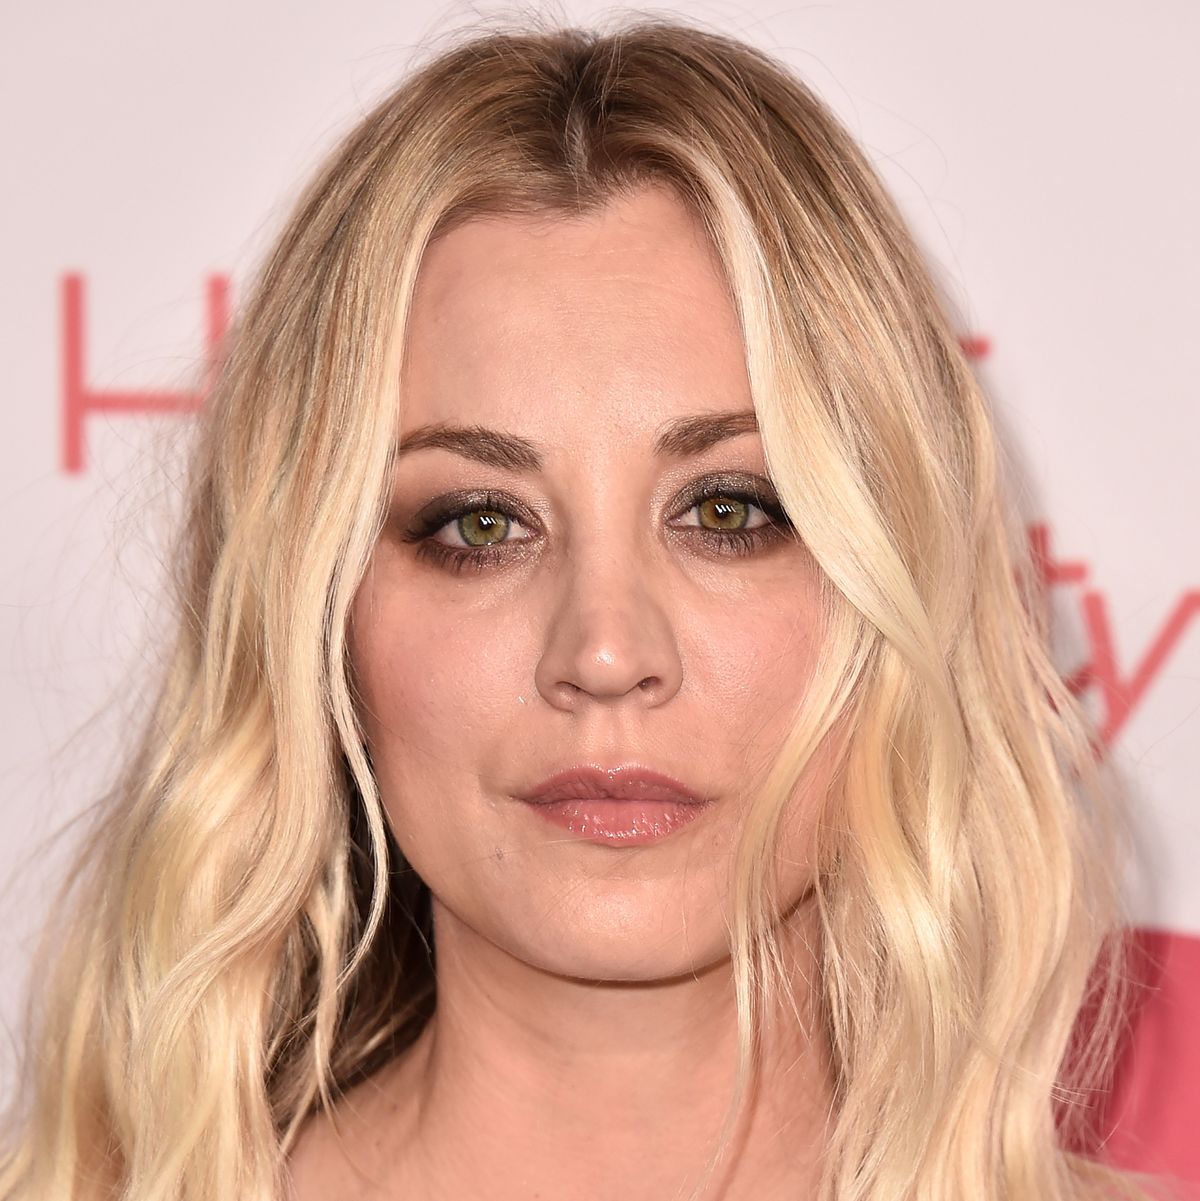 Kaley Cuoco 'Drowning in Tears' With Big Bang Theory Ending